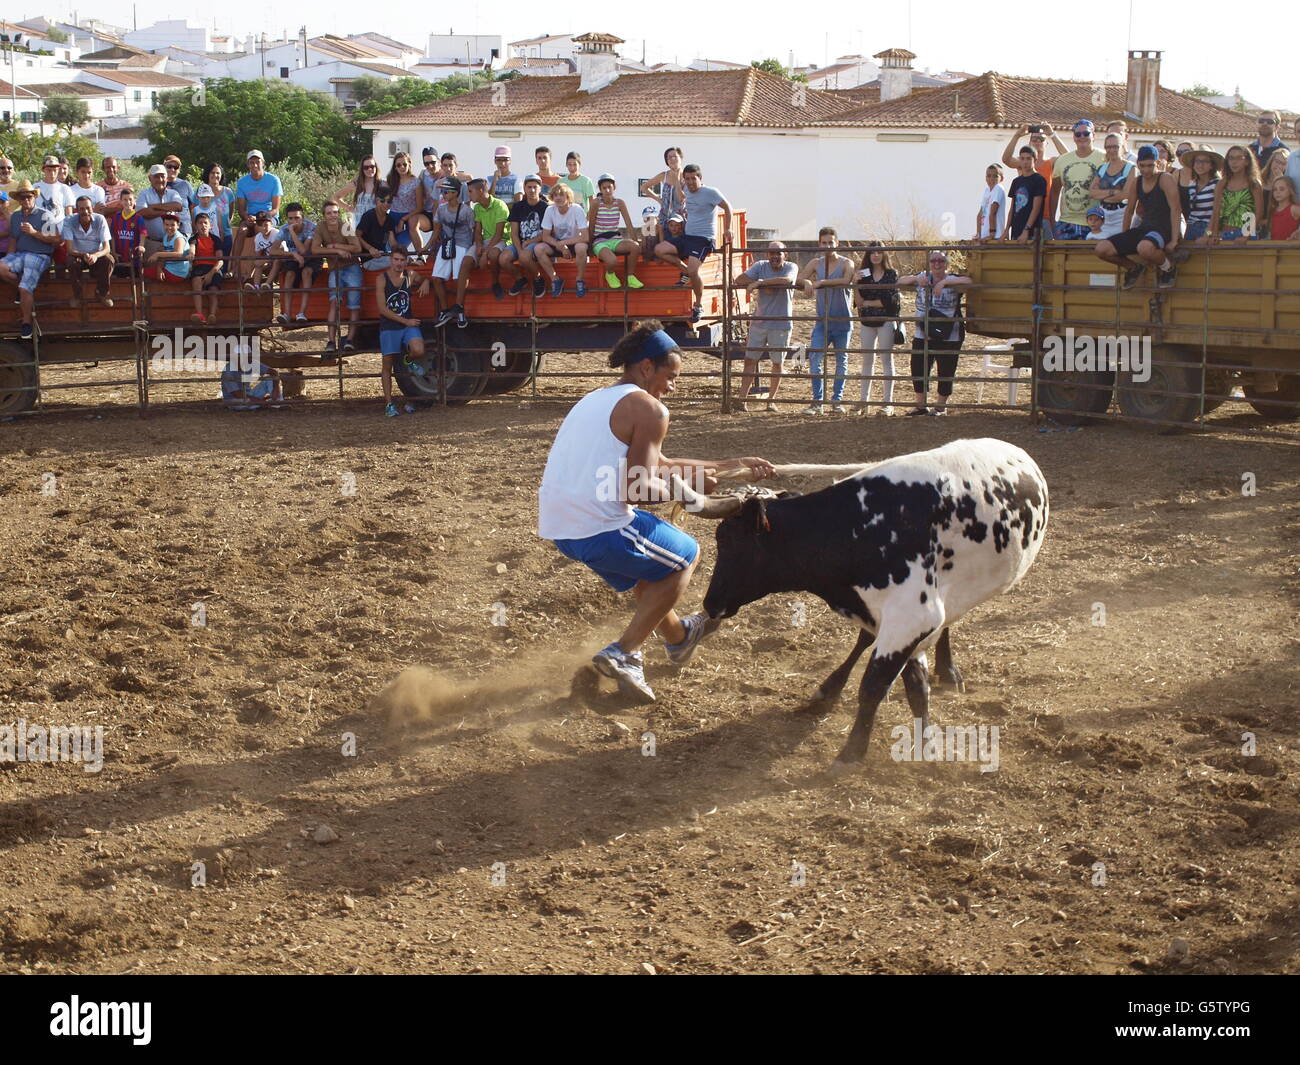 Annual event at the Small bullring in the village of Alenteja ,Portugal ...